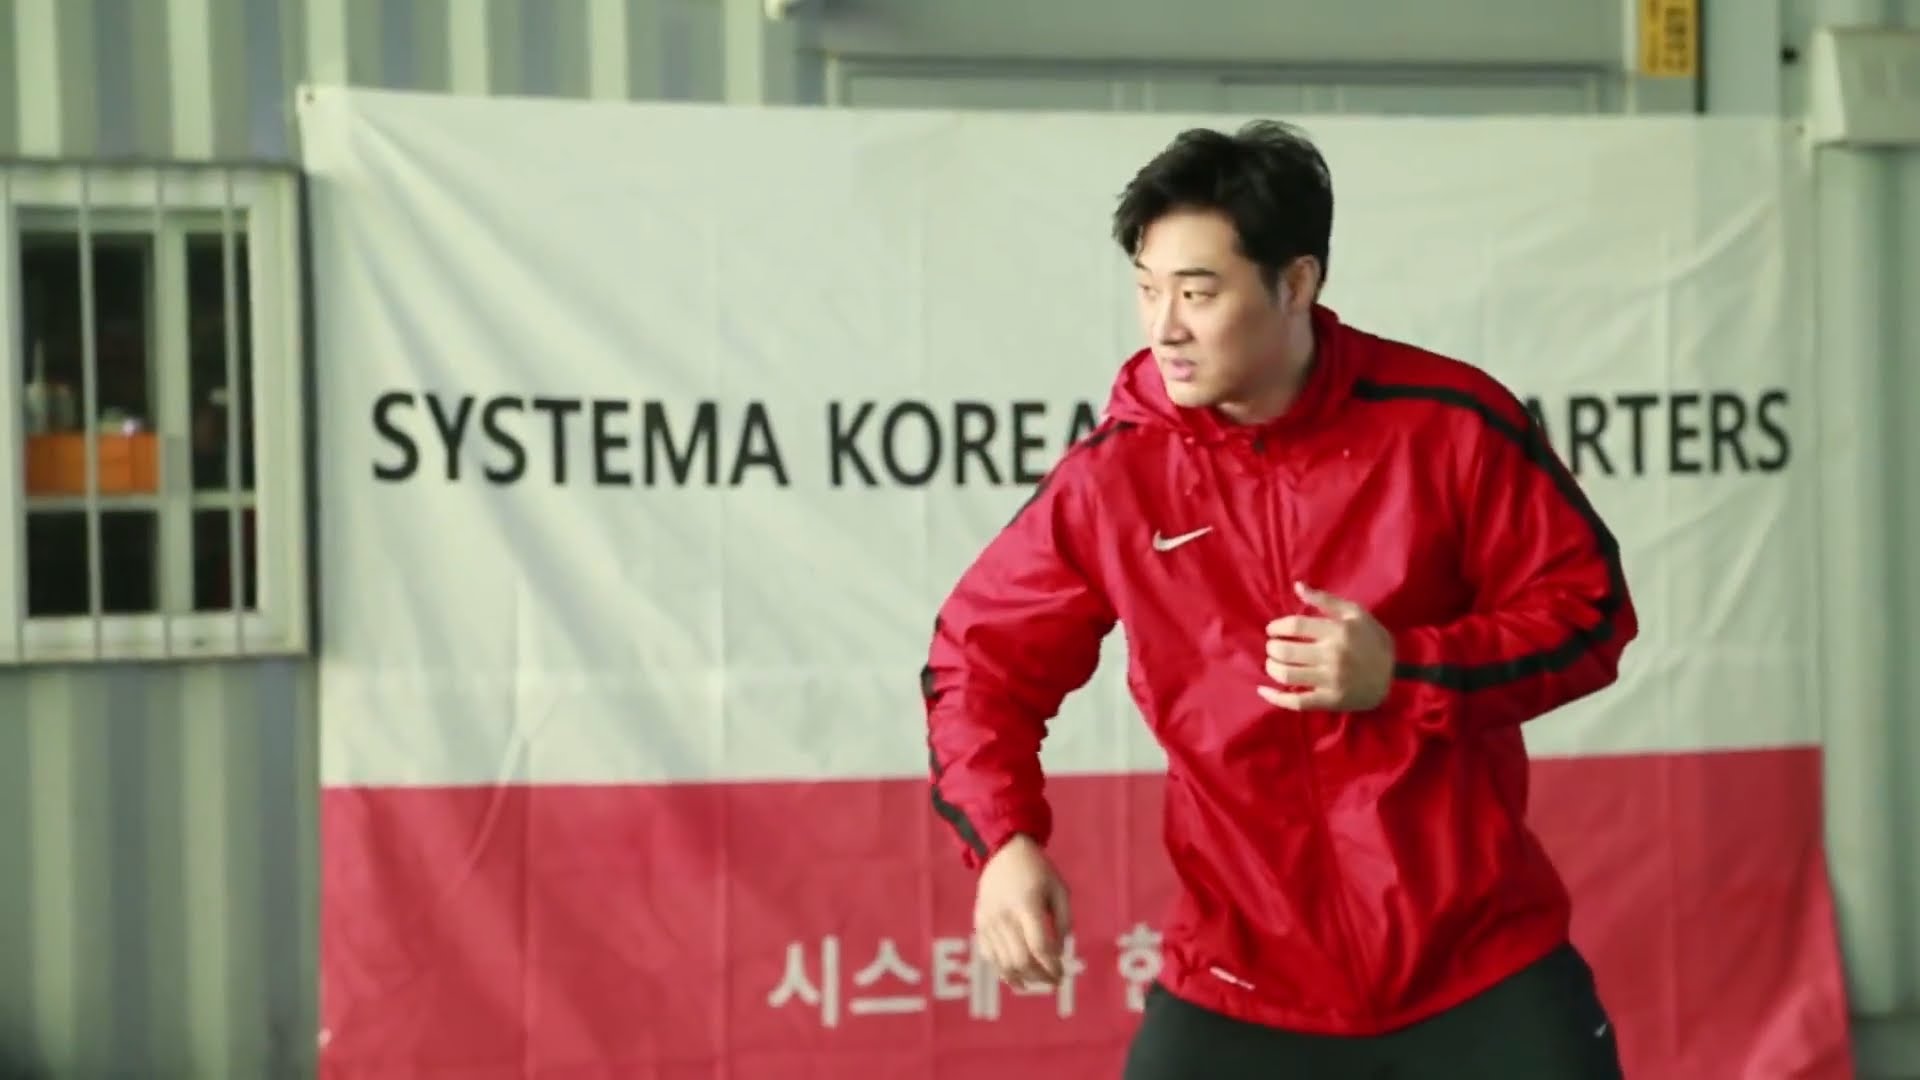 DK Yoo teaches combat system to Korean Special Forces